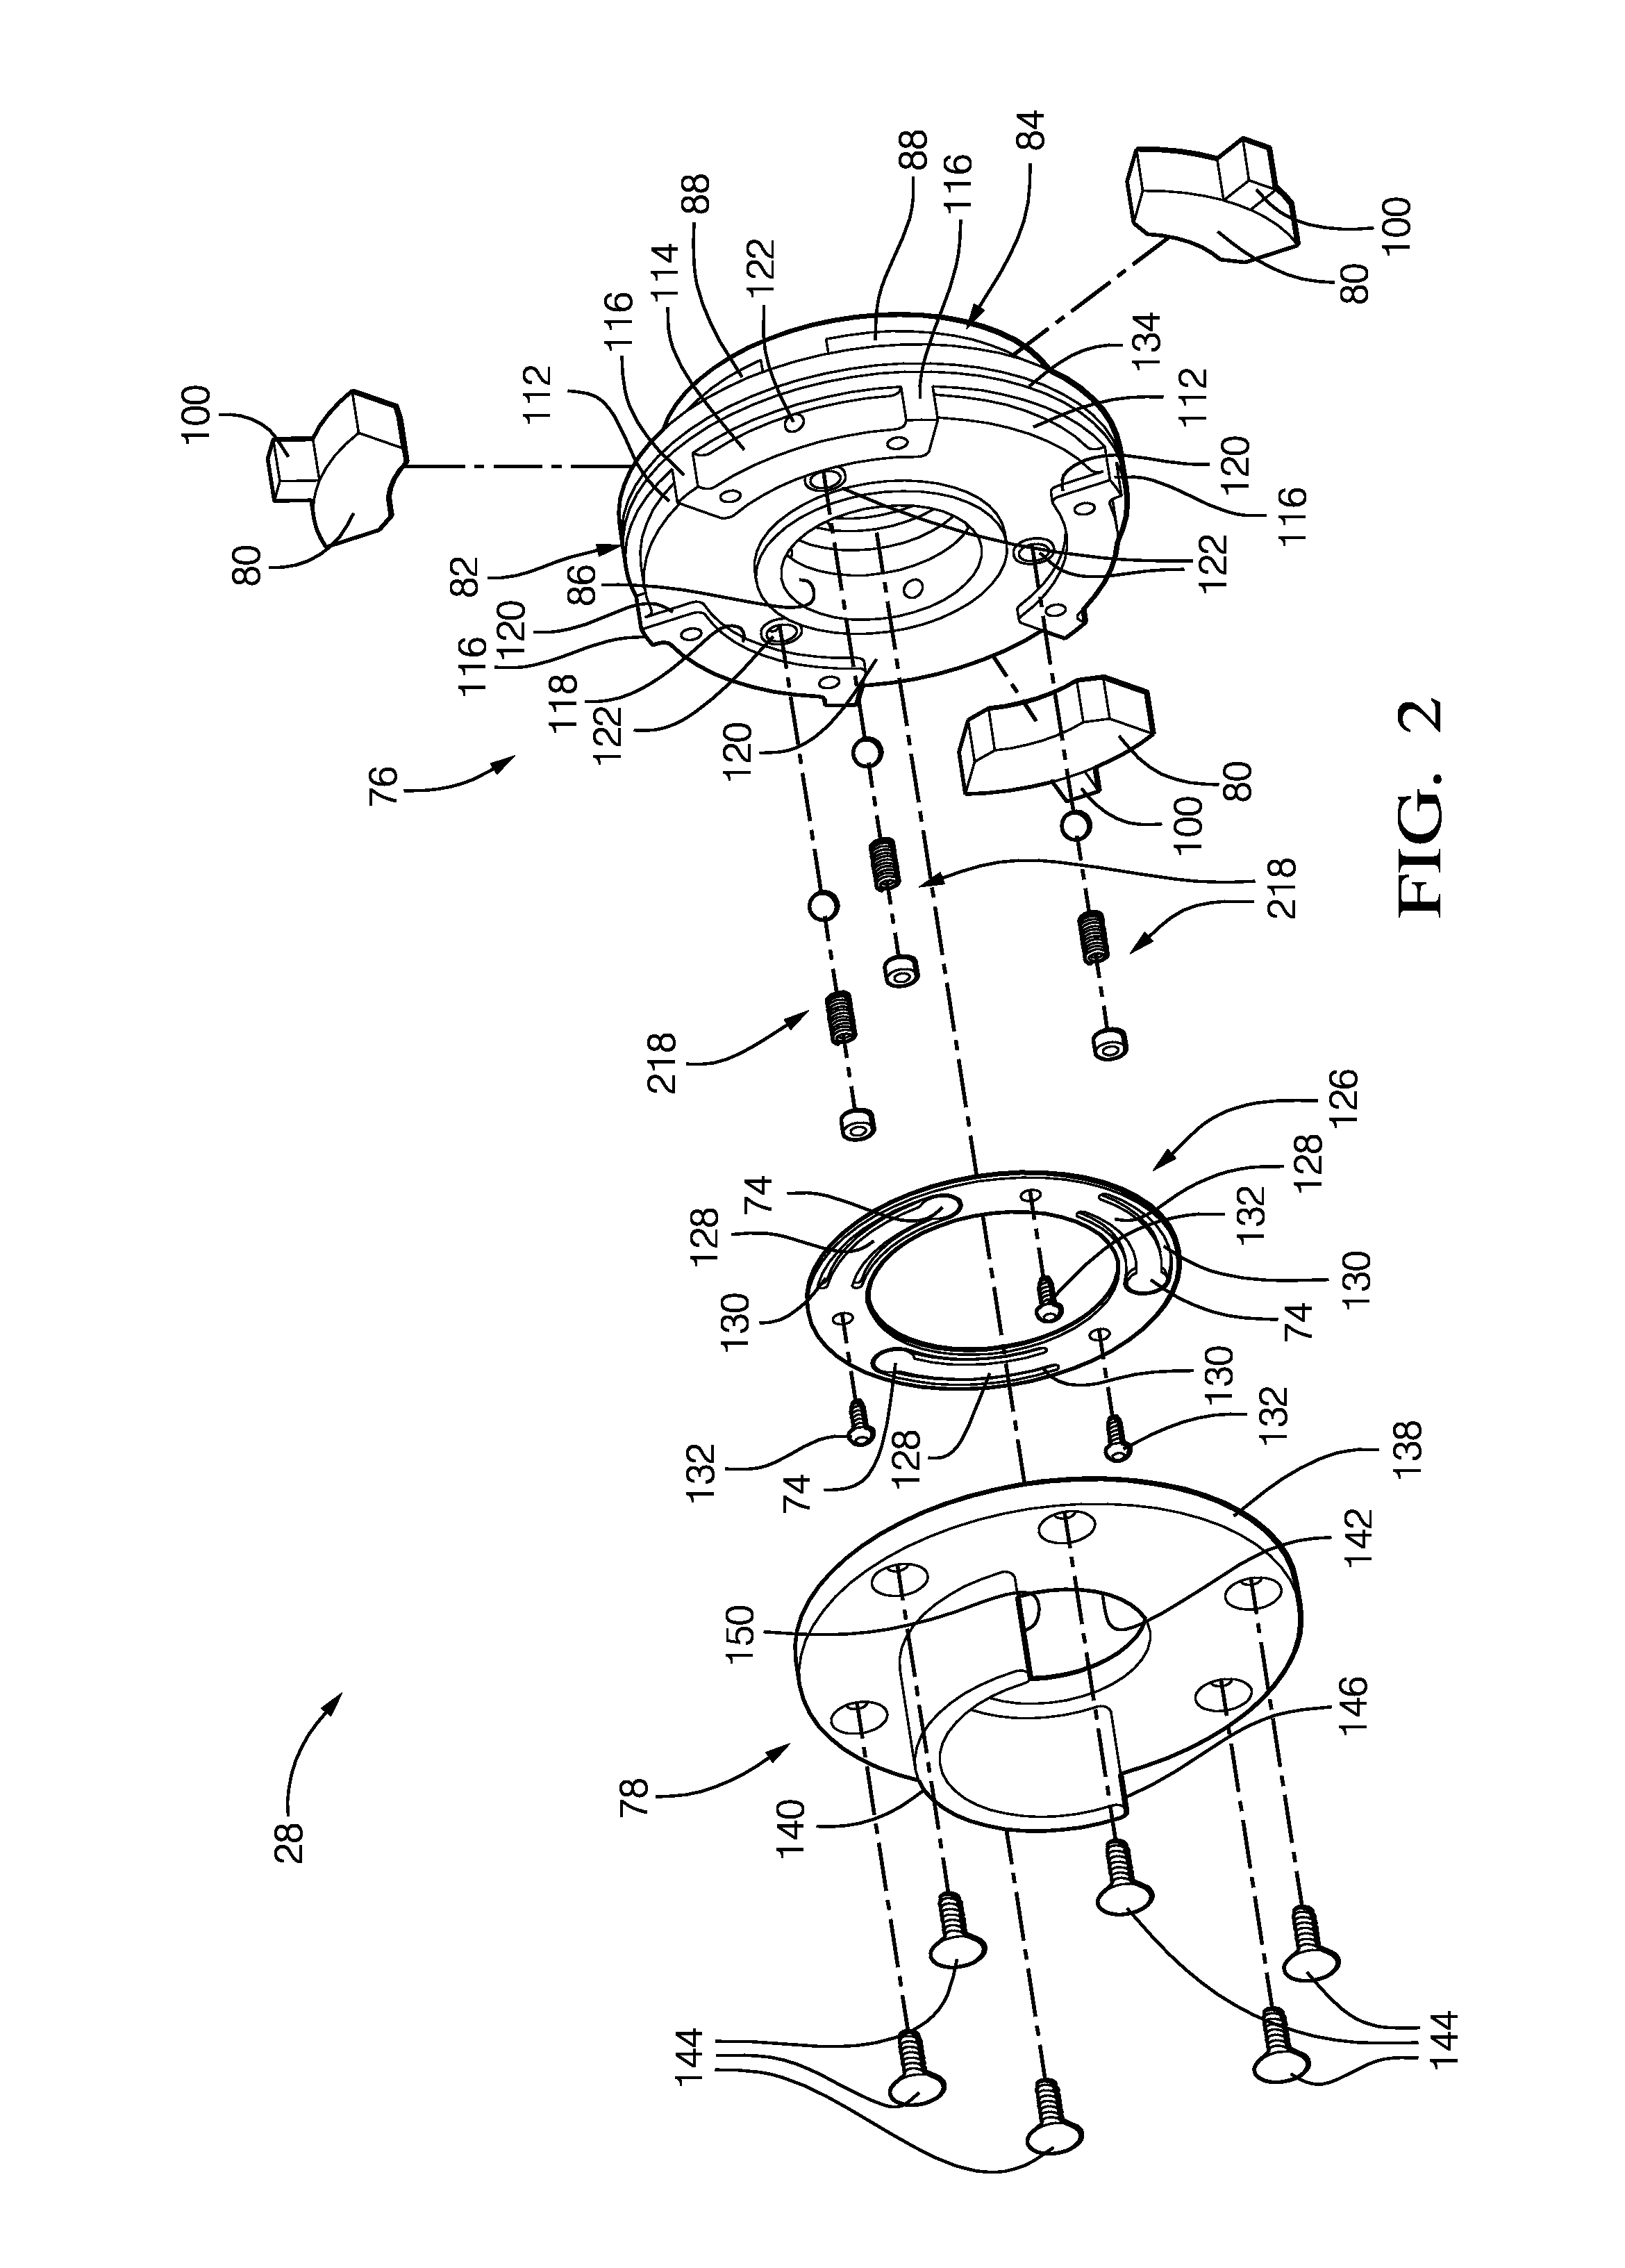 Camshaft phaser with a rotary valve spool positioned hydraulically